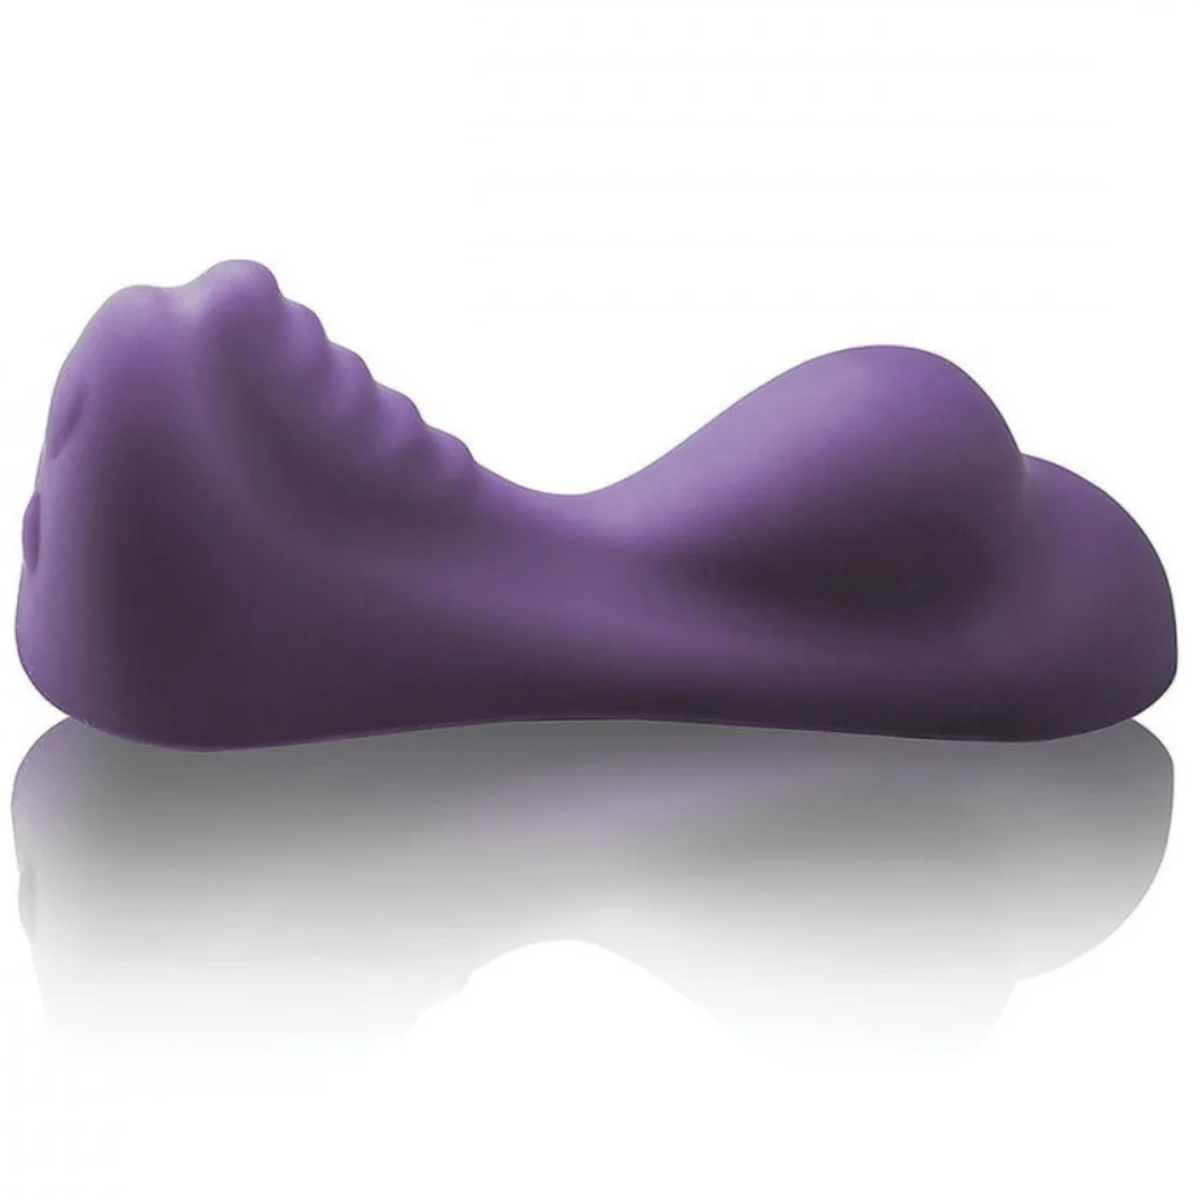 The Best Sex Toys for Humping and Grinding